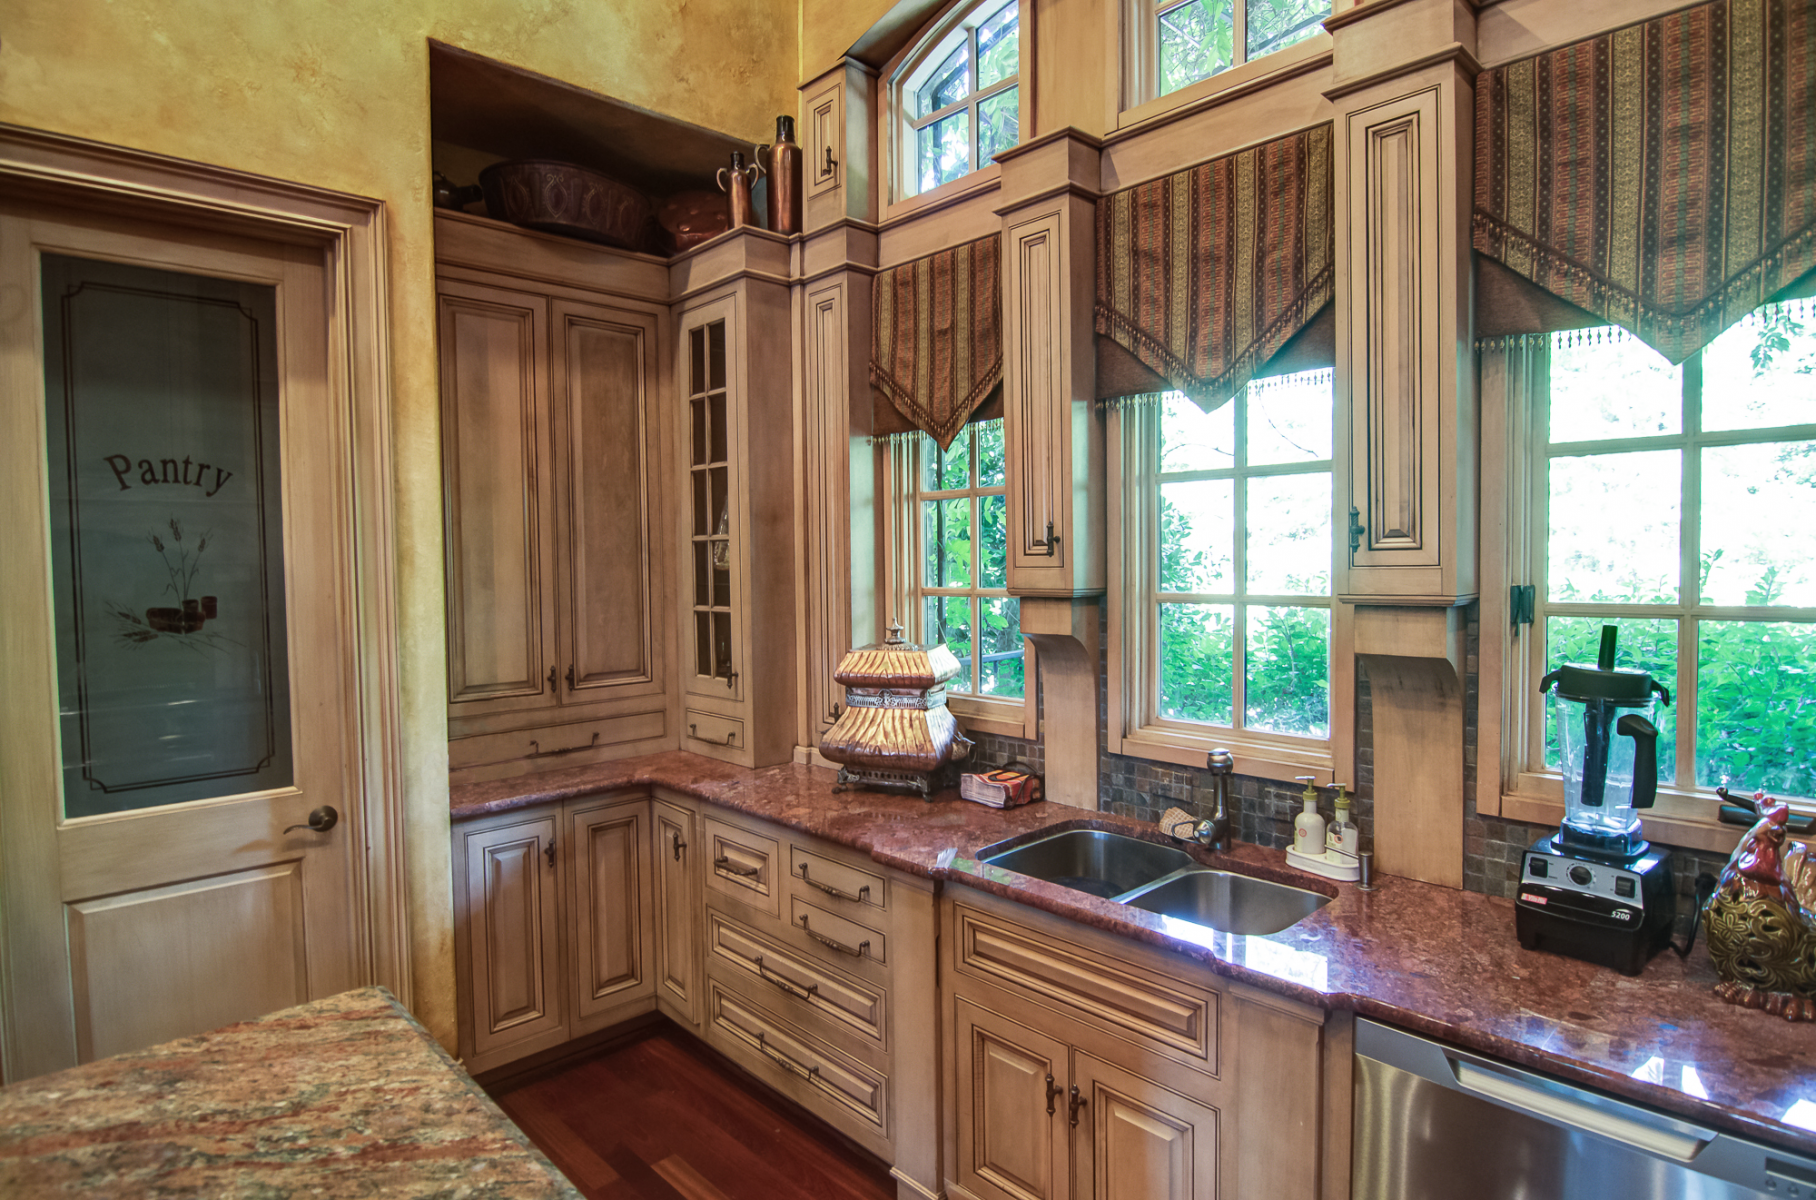 European colored plaster walls with matching cabinet glaze on wall panels.